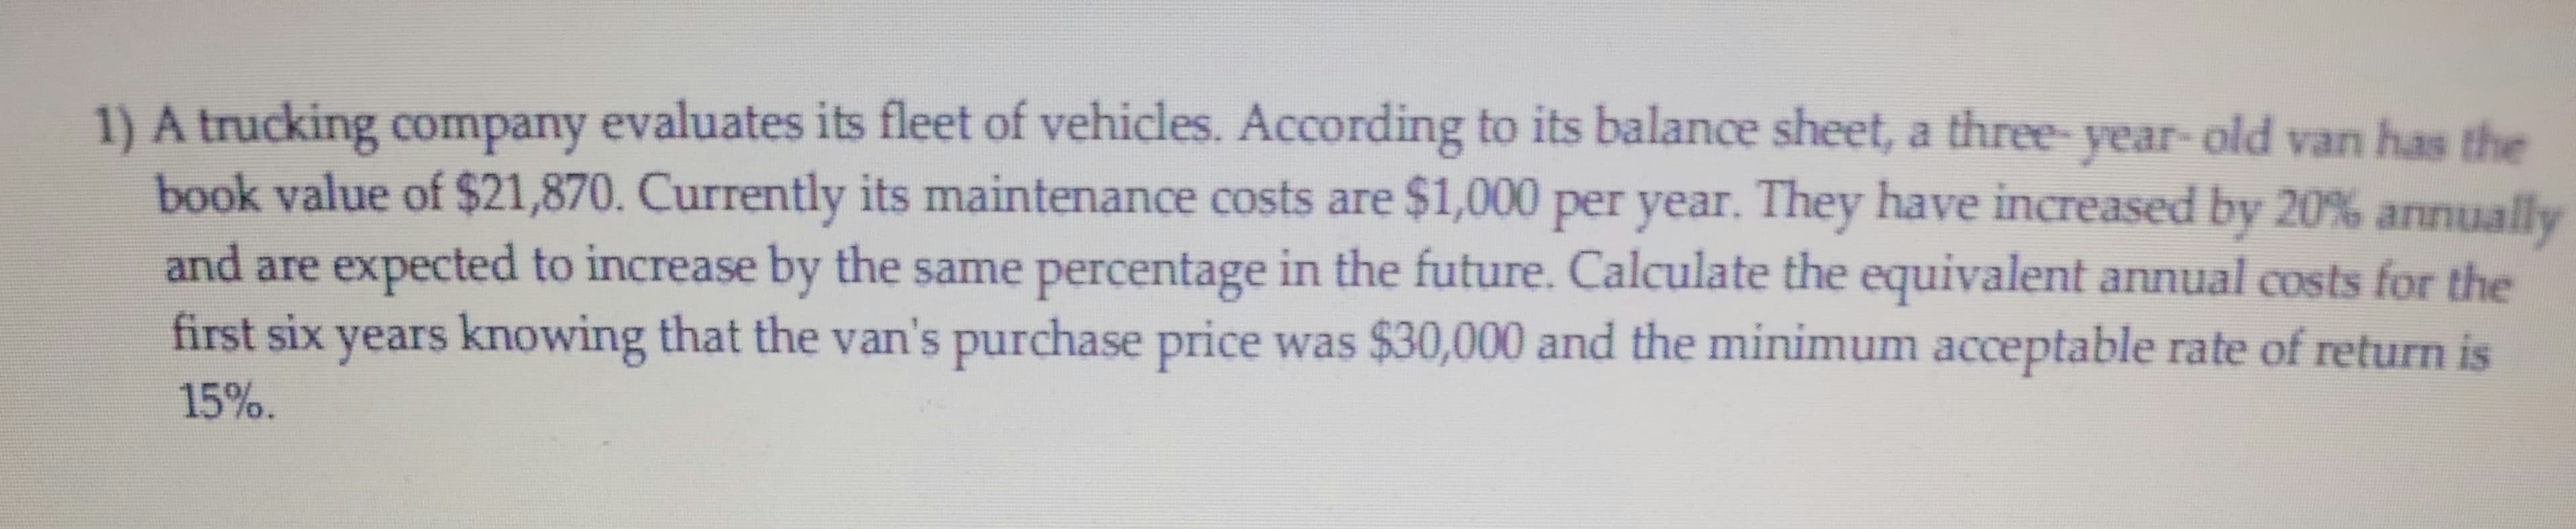 1) A trucking company evaluates its fleet of vehicles. According to its balance sheet, a three- year- old van has the
book value of $21,870. Currently its maintenance costs are $1,000 per year. They have increased by 20% annually
and are expected to increase by the same percentage in the future. Calculate the equivalent annual costs for the
first six years knowing that the van's purchase price was $30,000 and the minimum acceptable rate of return is
P
15%.
